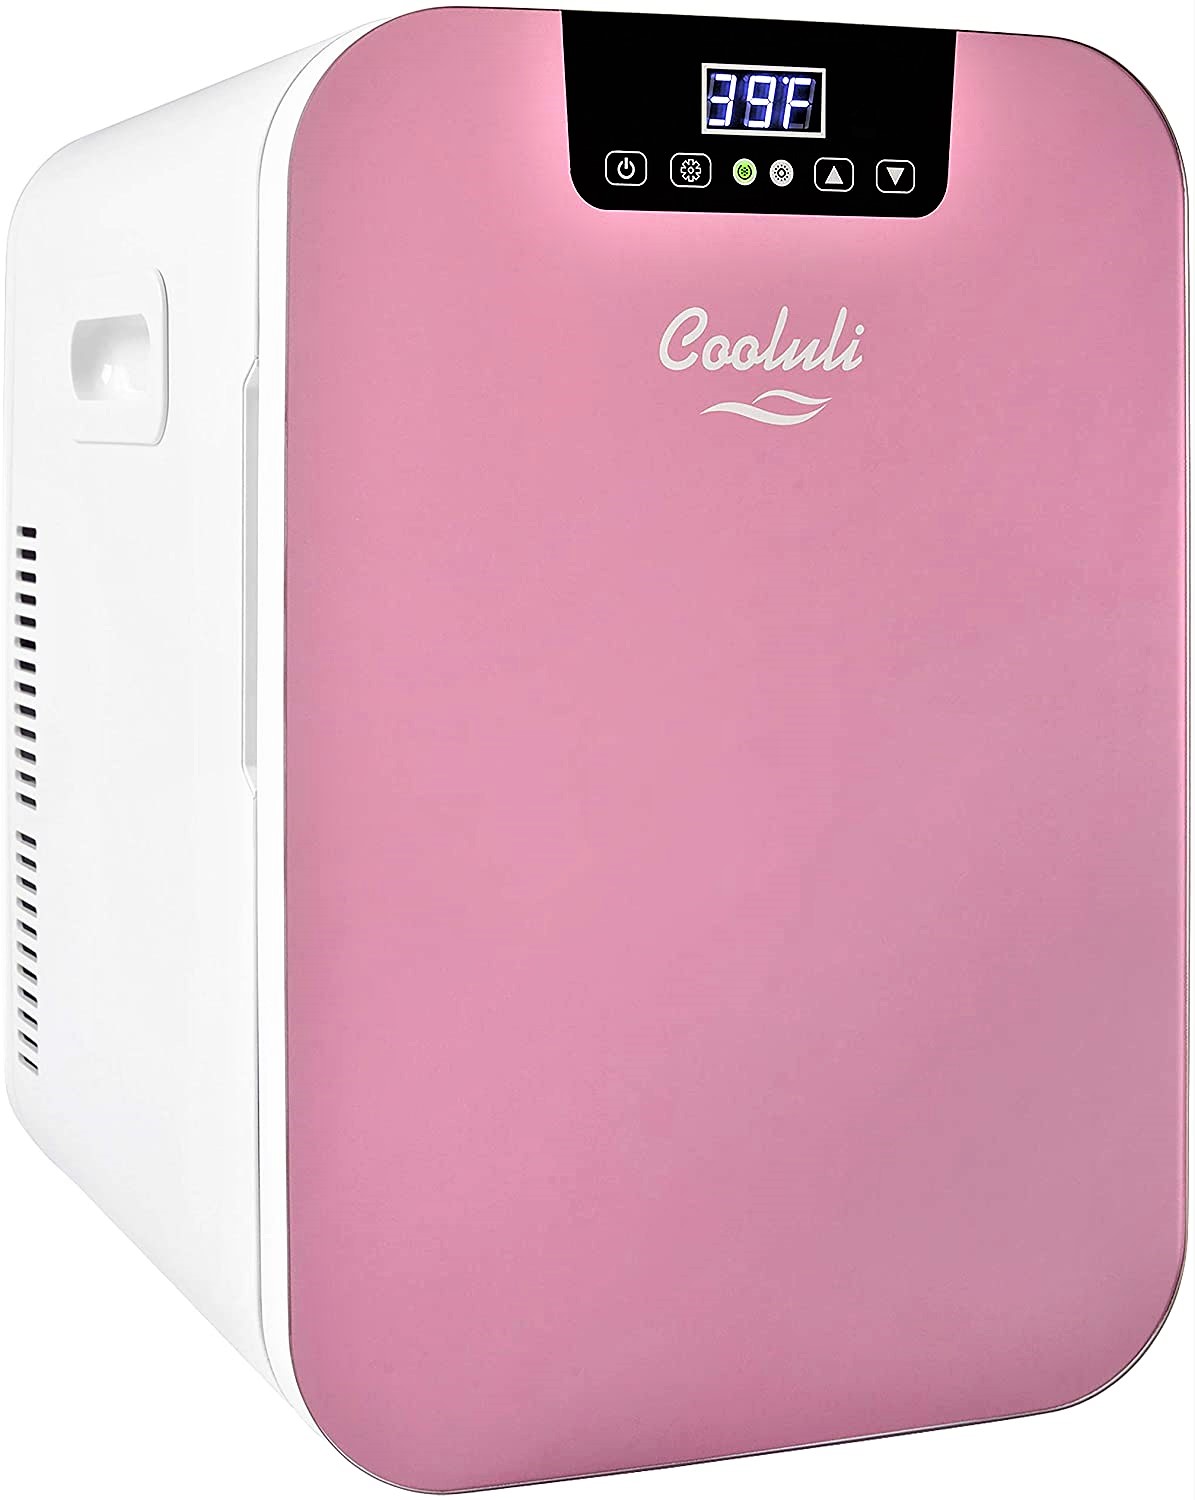 10 Best Portable Mini Fridge Cooler 2022 Under $100 Reviews All In One Cooling Gear Lab: Any Refrigerators Air Conditioners Freezers Ice Makers Coolers Fans Reviewed And Compared.